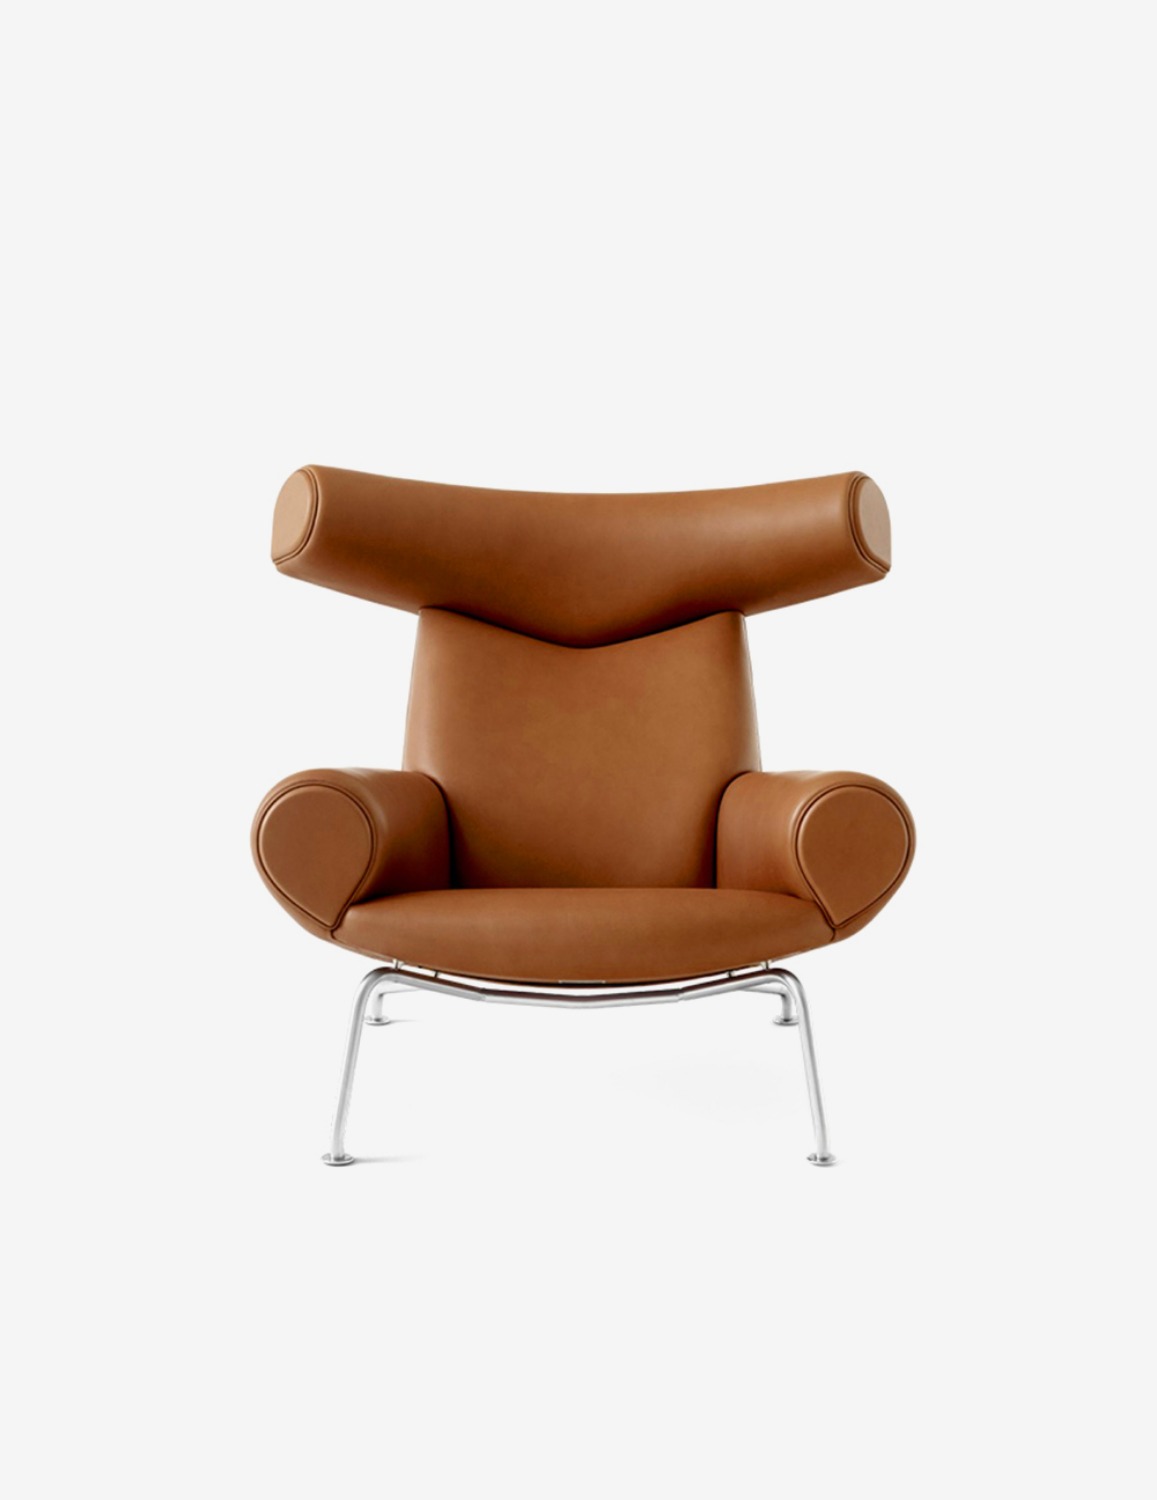 [Fredericia] Wegner OX chair (Leather)